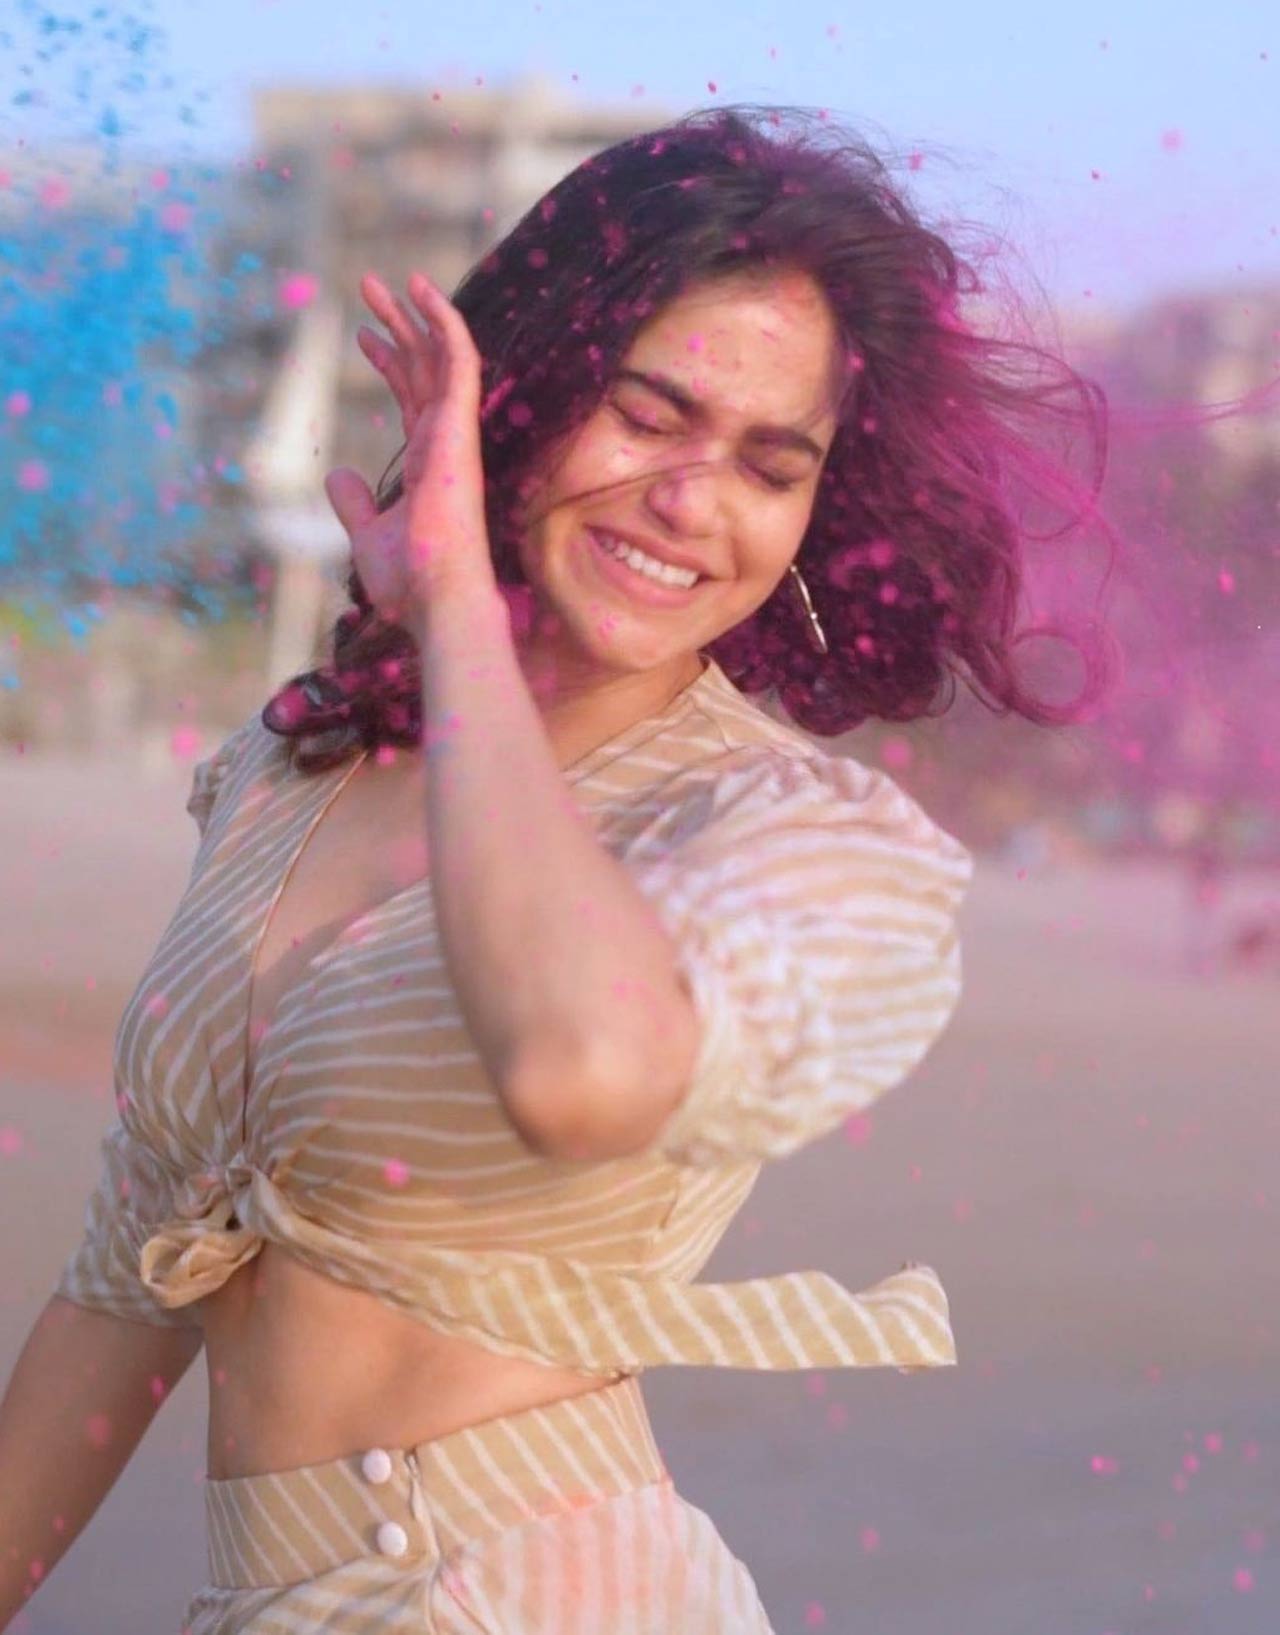 Aaditi S Pohankar wishes fans a Happy holi with thsi stunning picture and what a capture! Returning to the screen with the second season of She, Aaditi Pohankar says she had a lot to learn from her on-screen character, an underdog constable who goes undecover as a sex worker